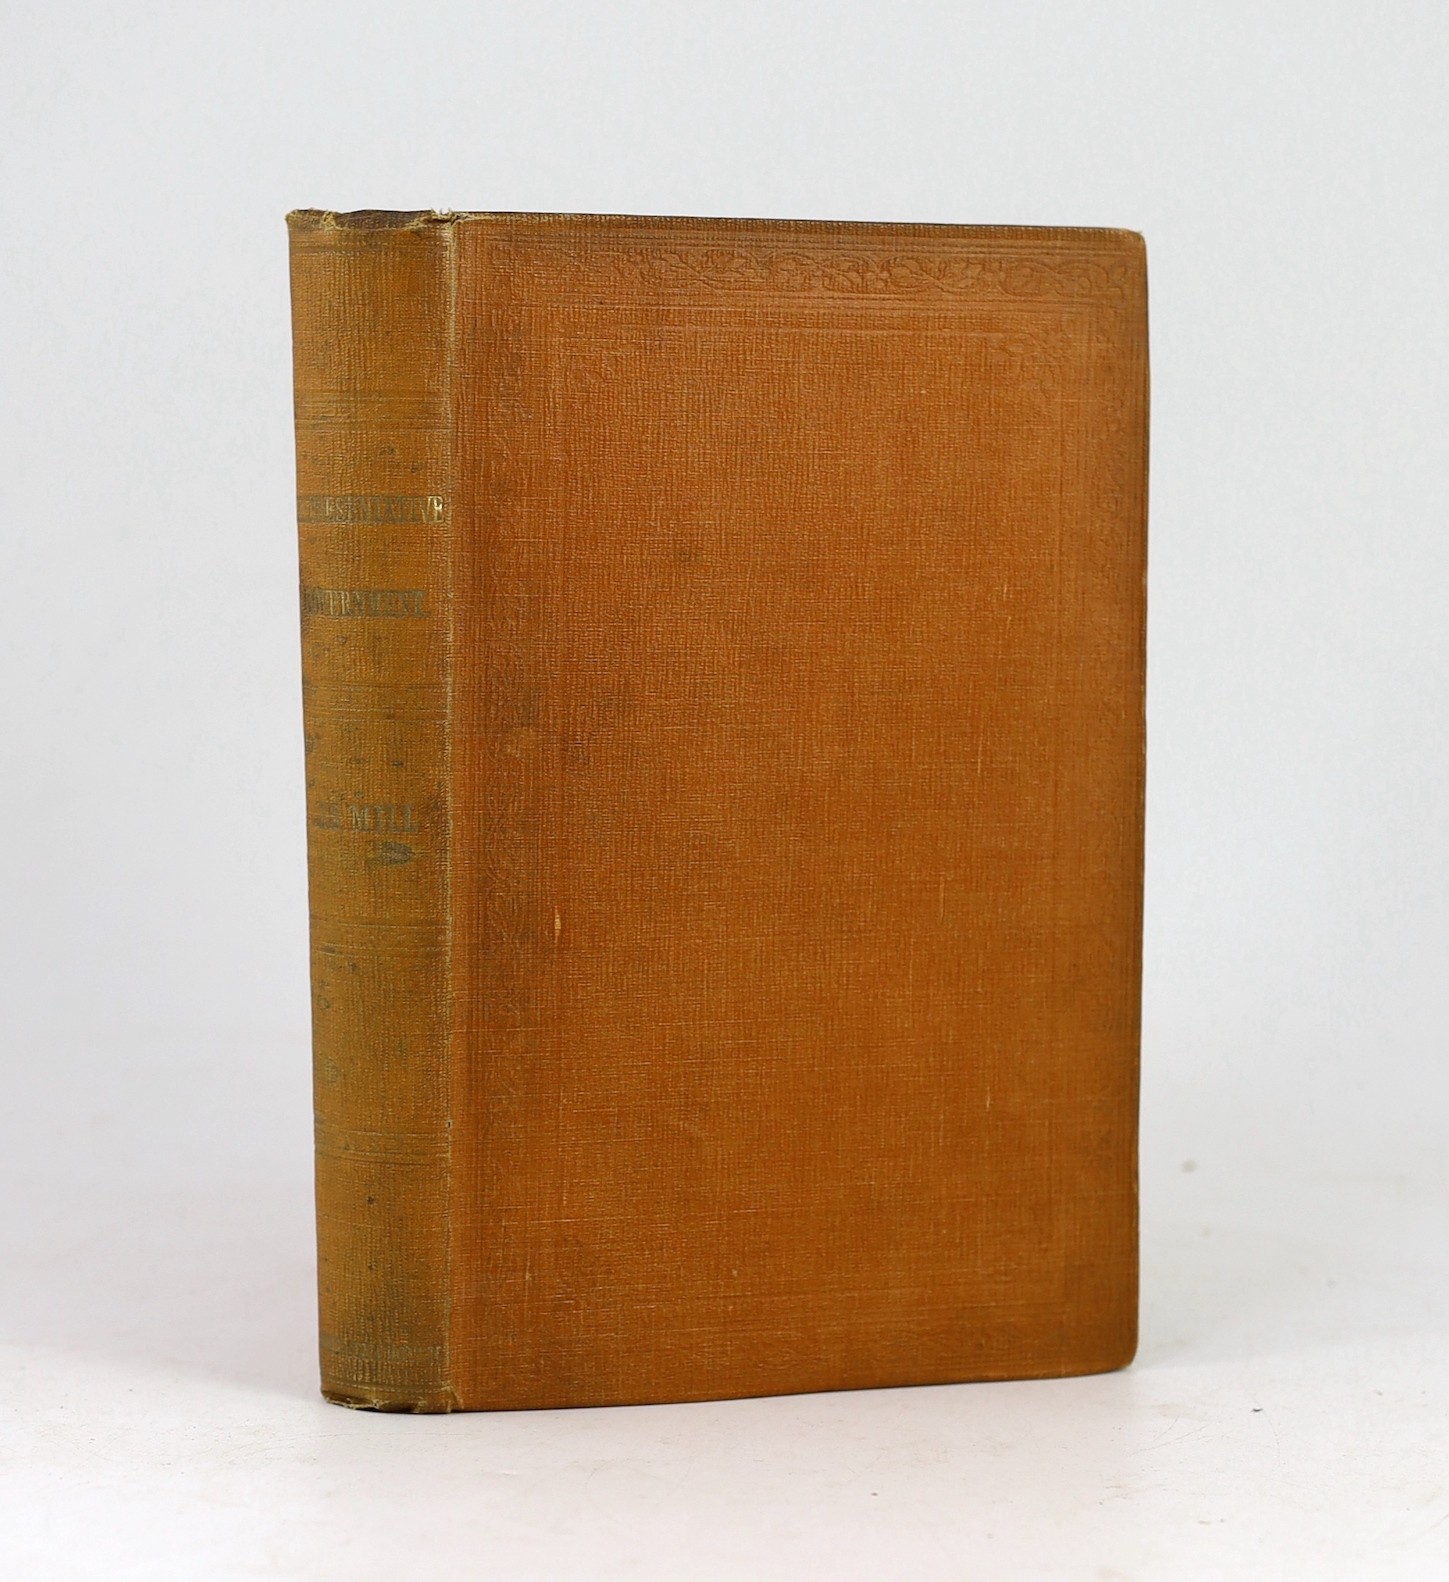 Mill, John Stuart - Considerations on Representative Government. 2nd edition. half title; original blind-decorated and gilt-lettered orange cloth. 1861